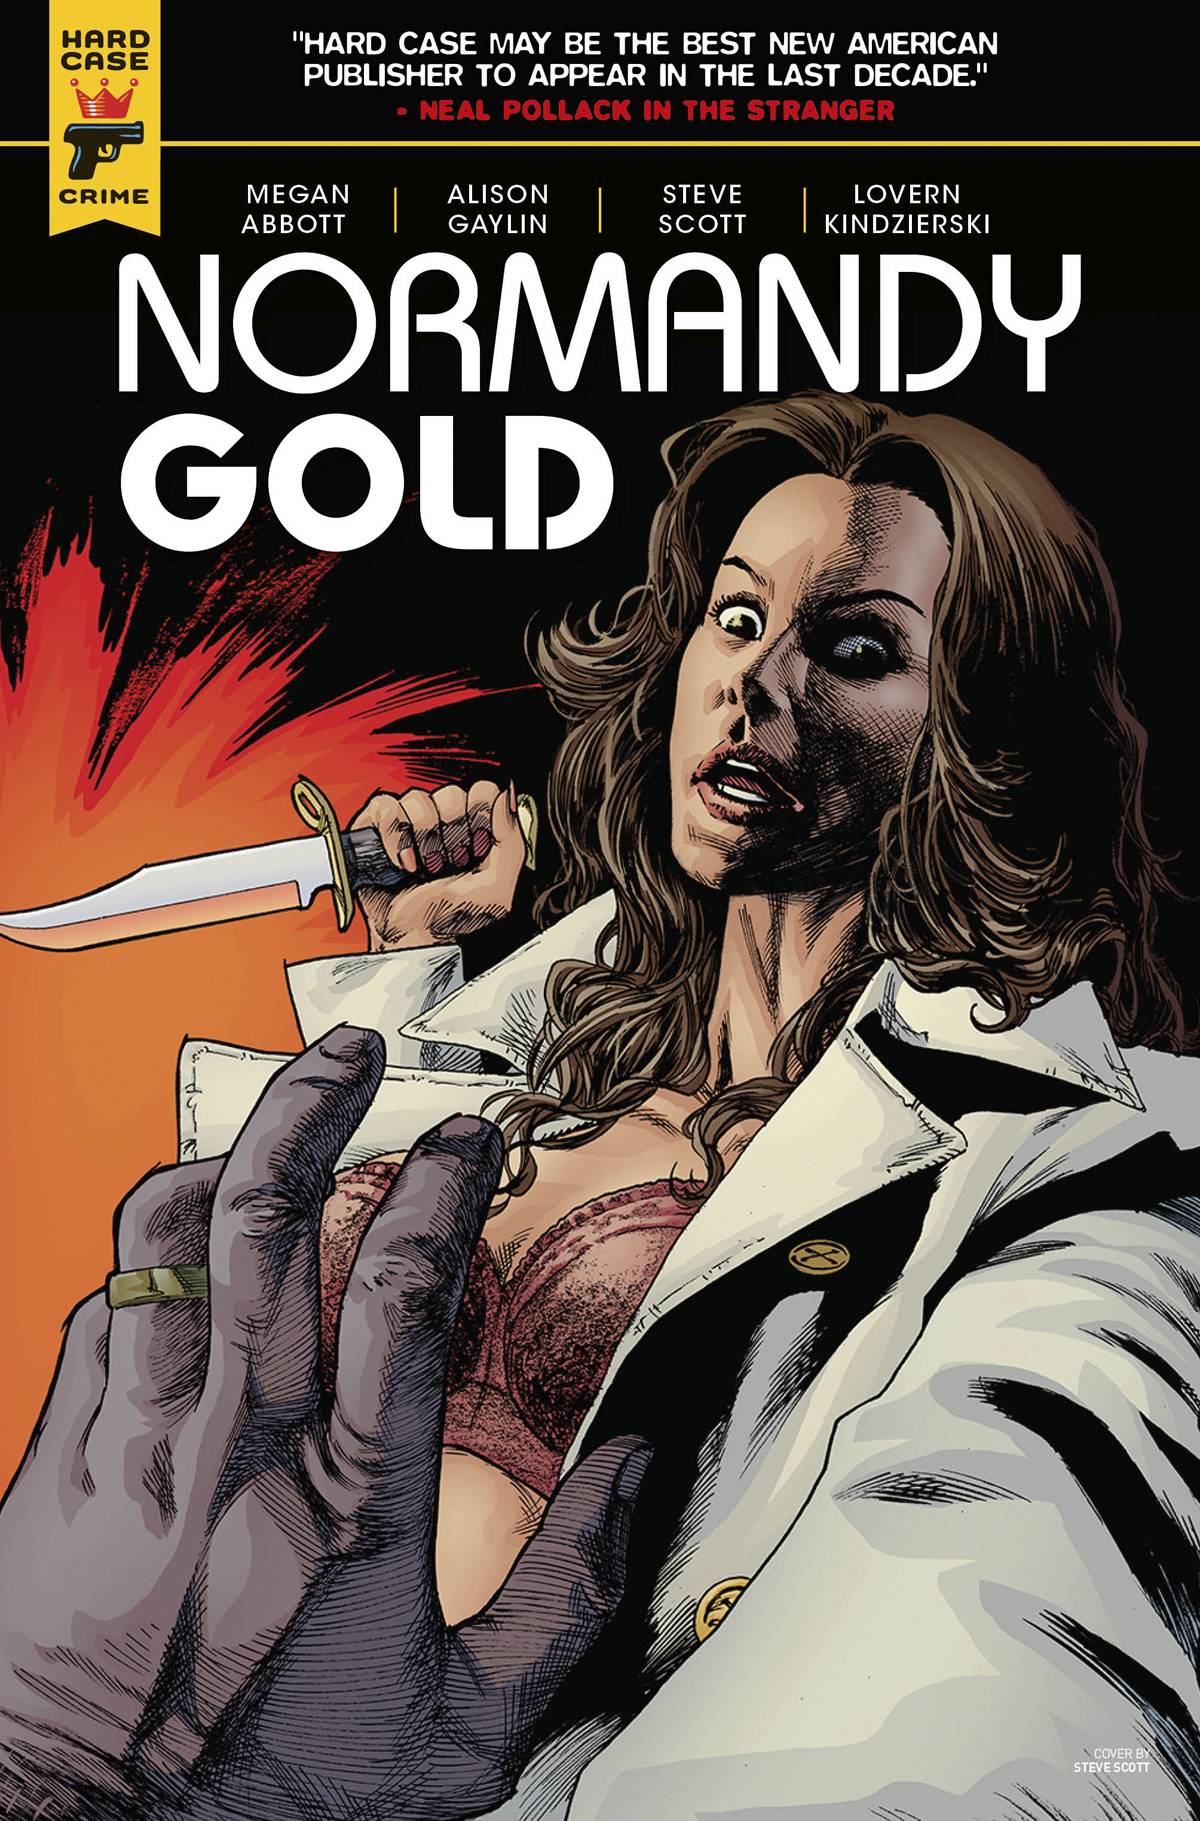 NORMANDY GOLD#3